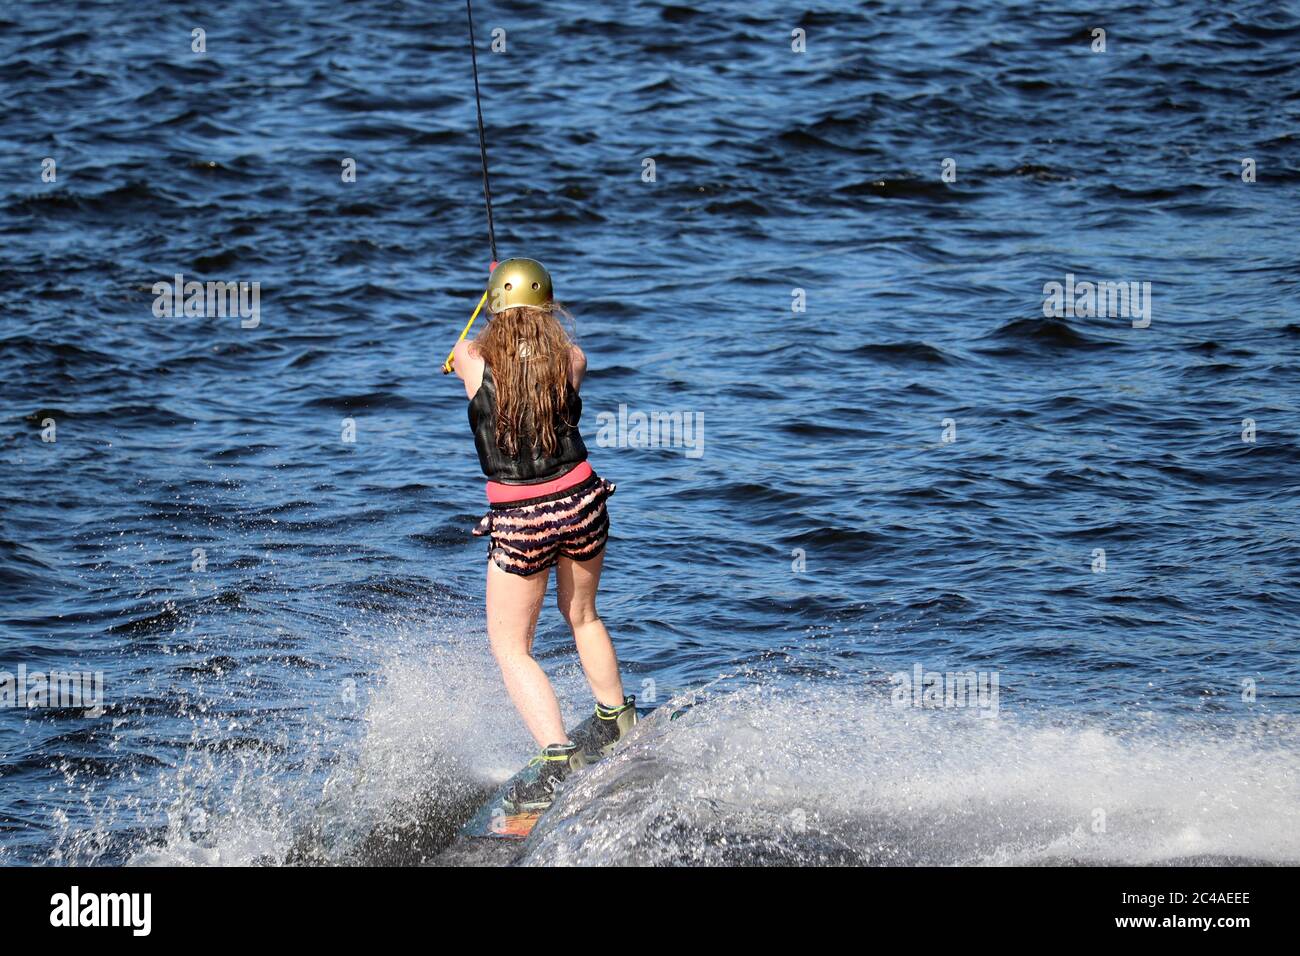 Wakeboarding in sunny day, girl riding on board in a spray of water. Surfer in the sea, summer sport Stock Photo